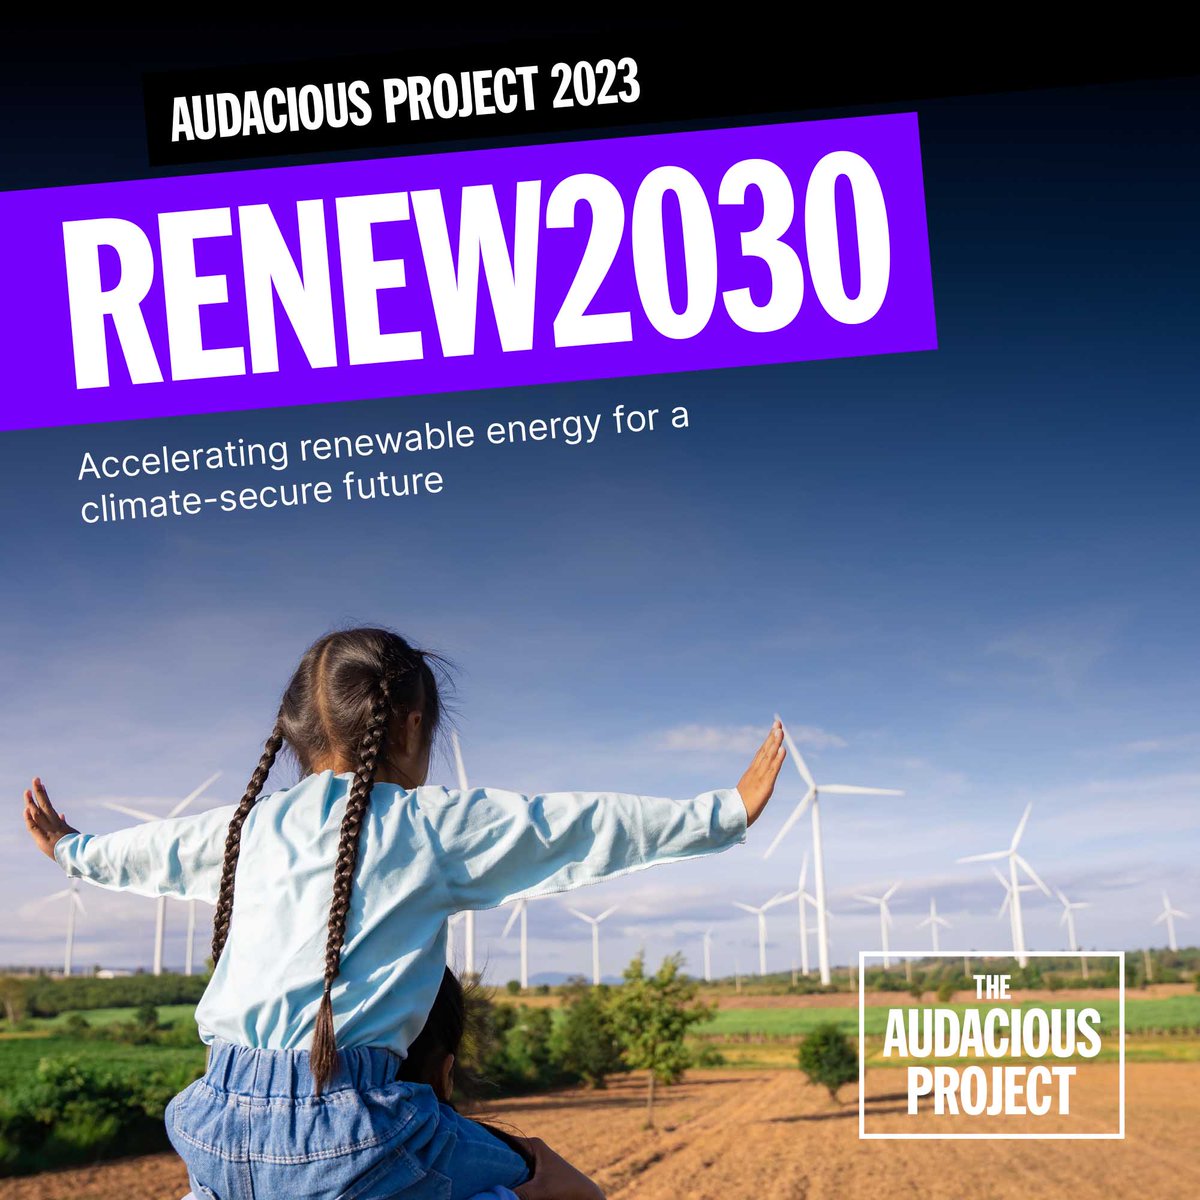 Rebecca from Renew2030 will be taking to the stage this Friday at #TEDCountdown 🎙 Meanwhile, learn more about the organization and Audacious goals: audaciousproject.org/grantees/renew… #AudaciousProject